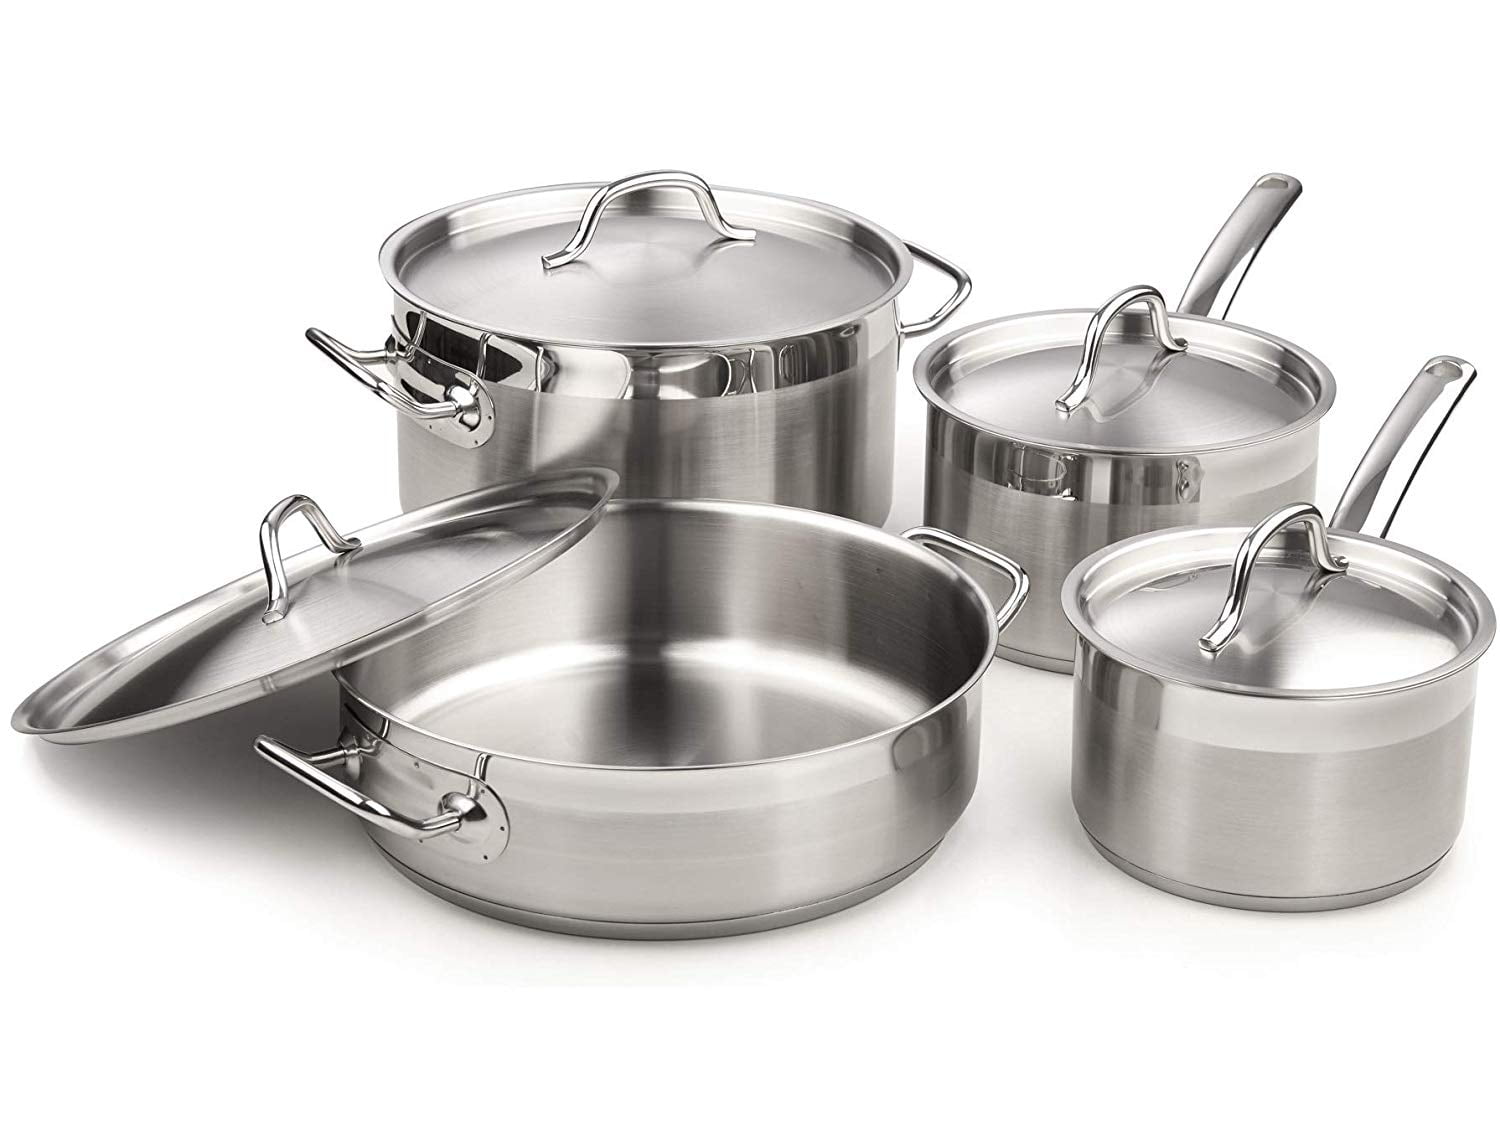 Generic 35 - Piece Stainless Steel Cookware Set & Reviews